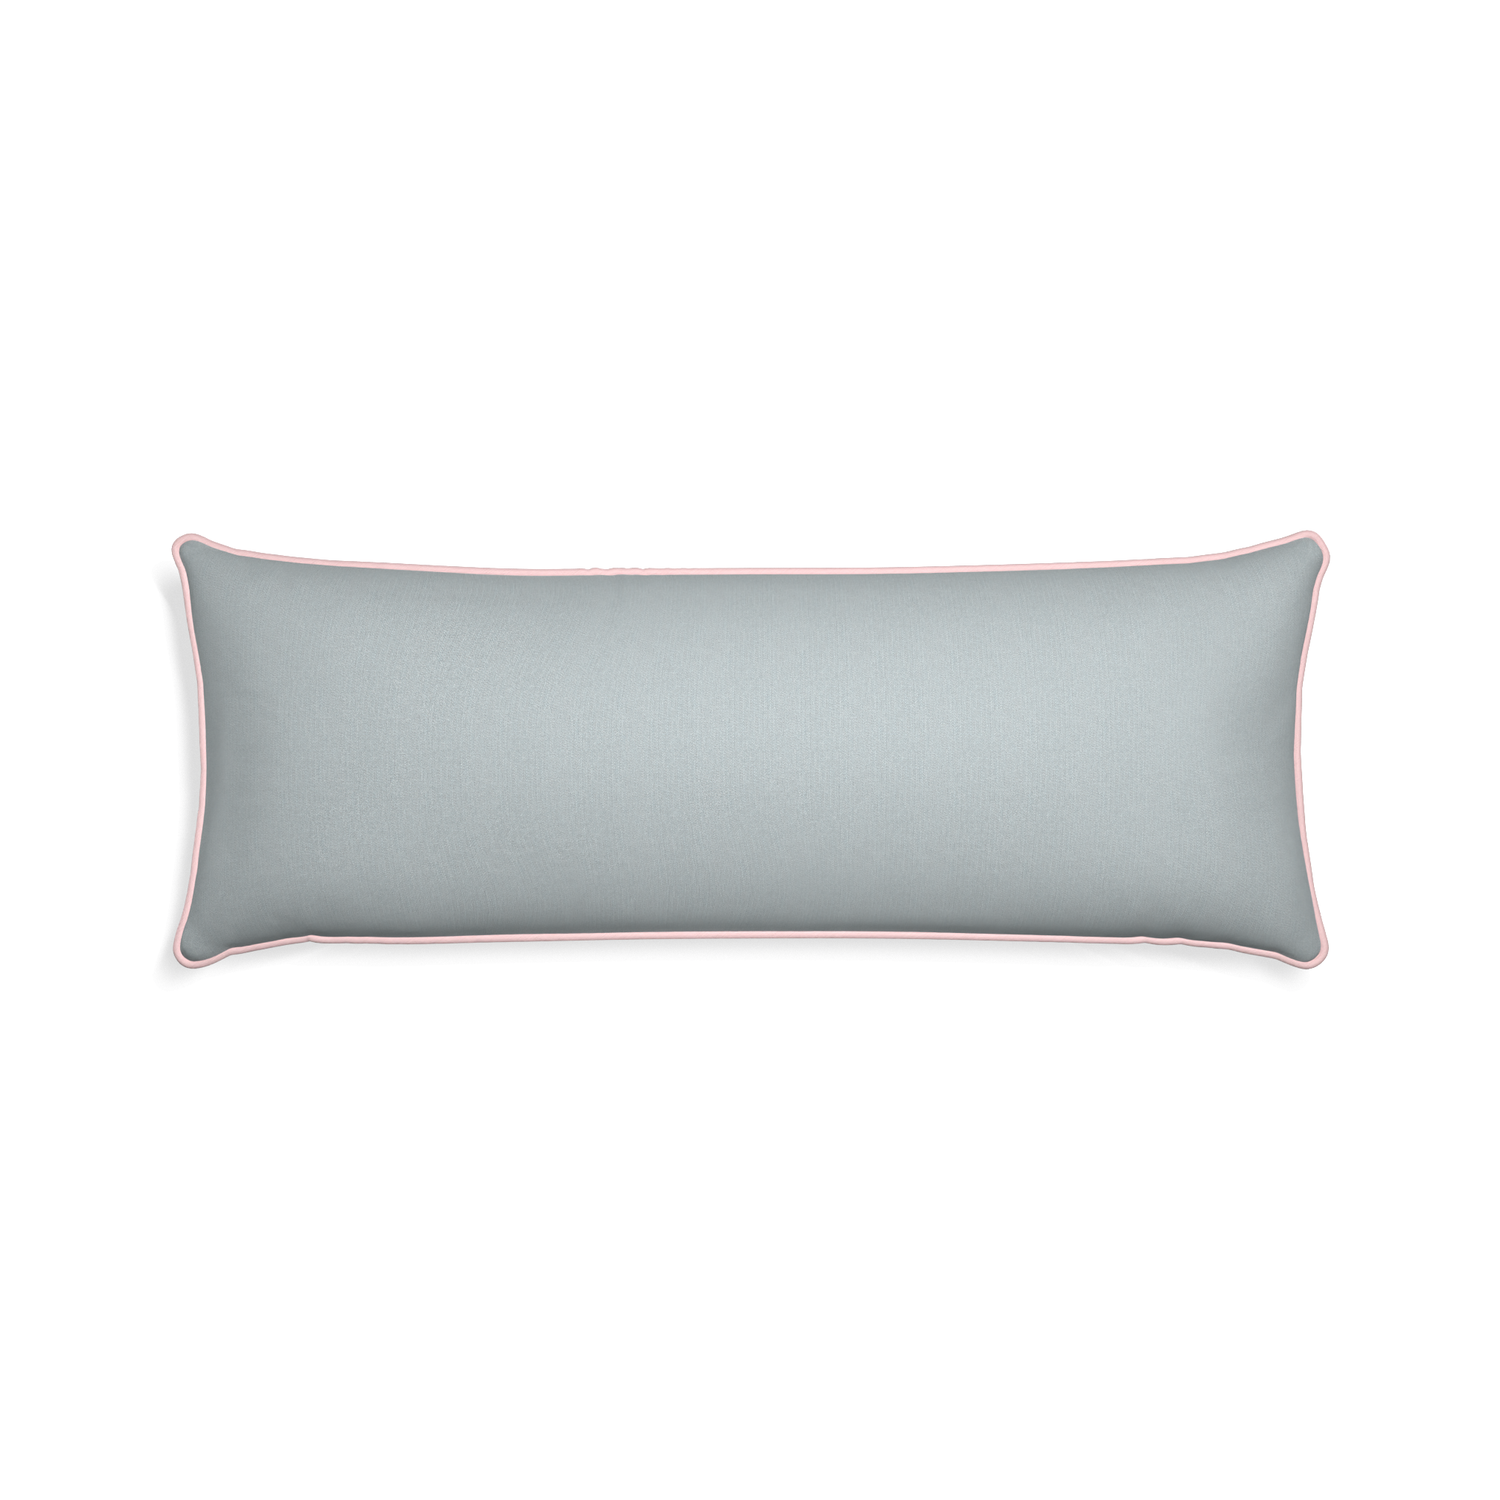 Xl-lumbar sea custom grey bluepillow with petal piping on white background